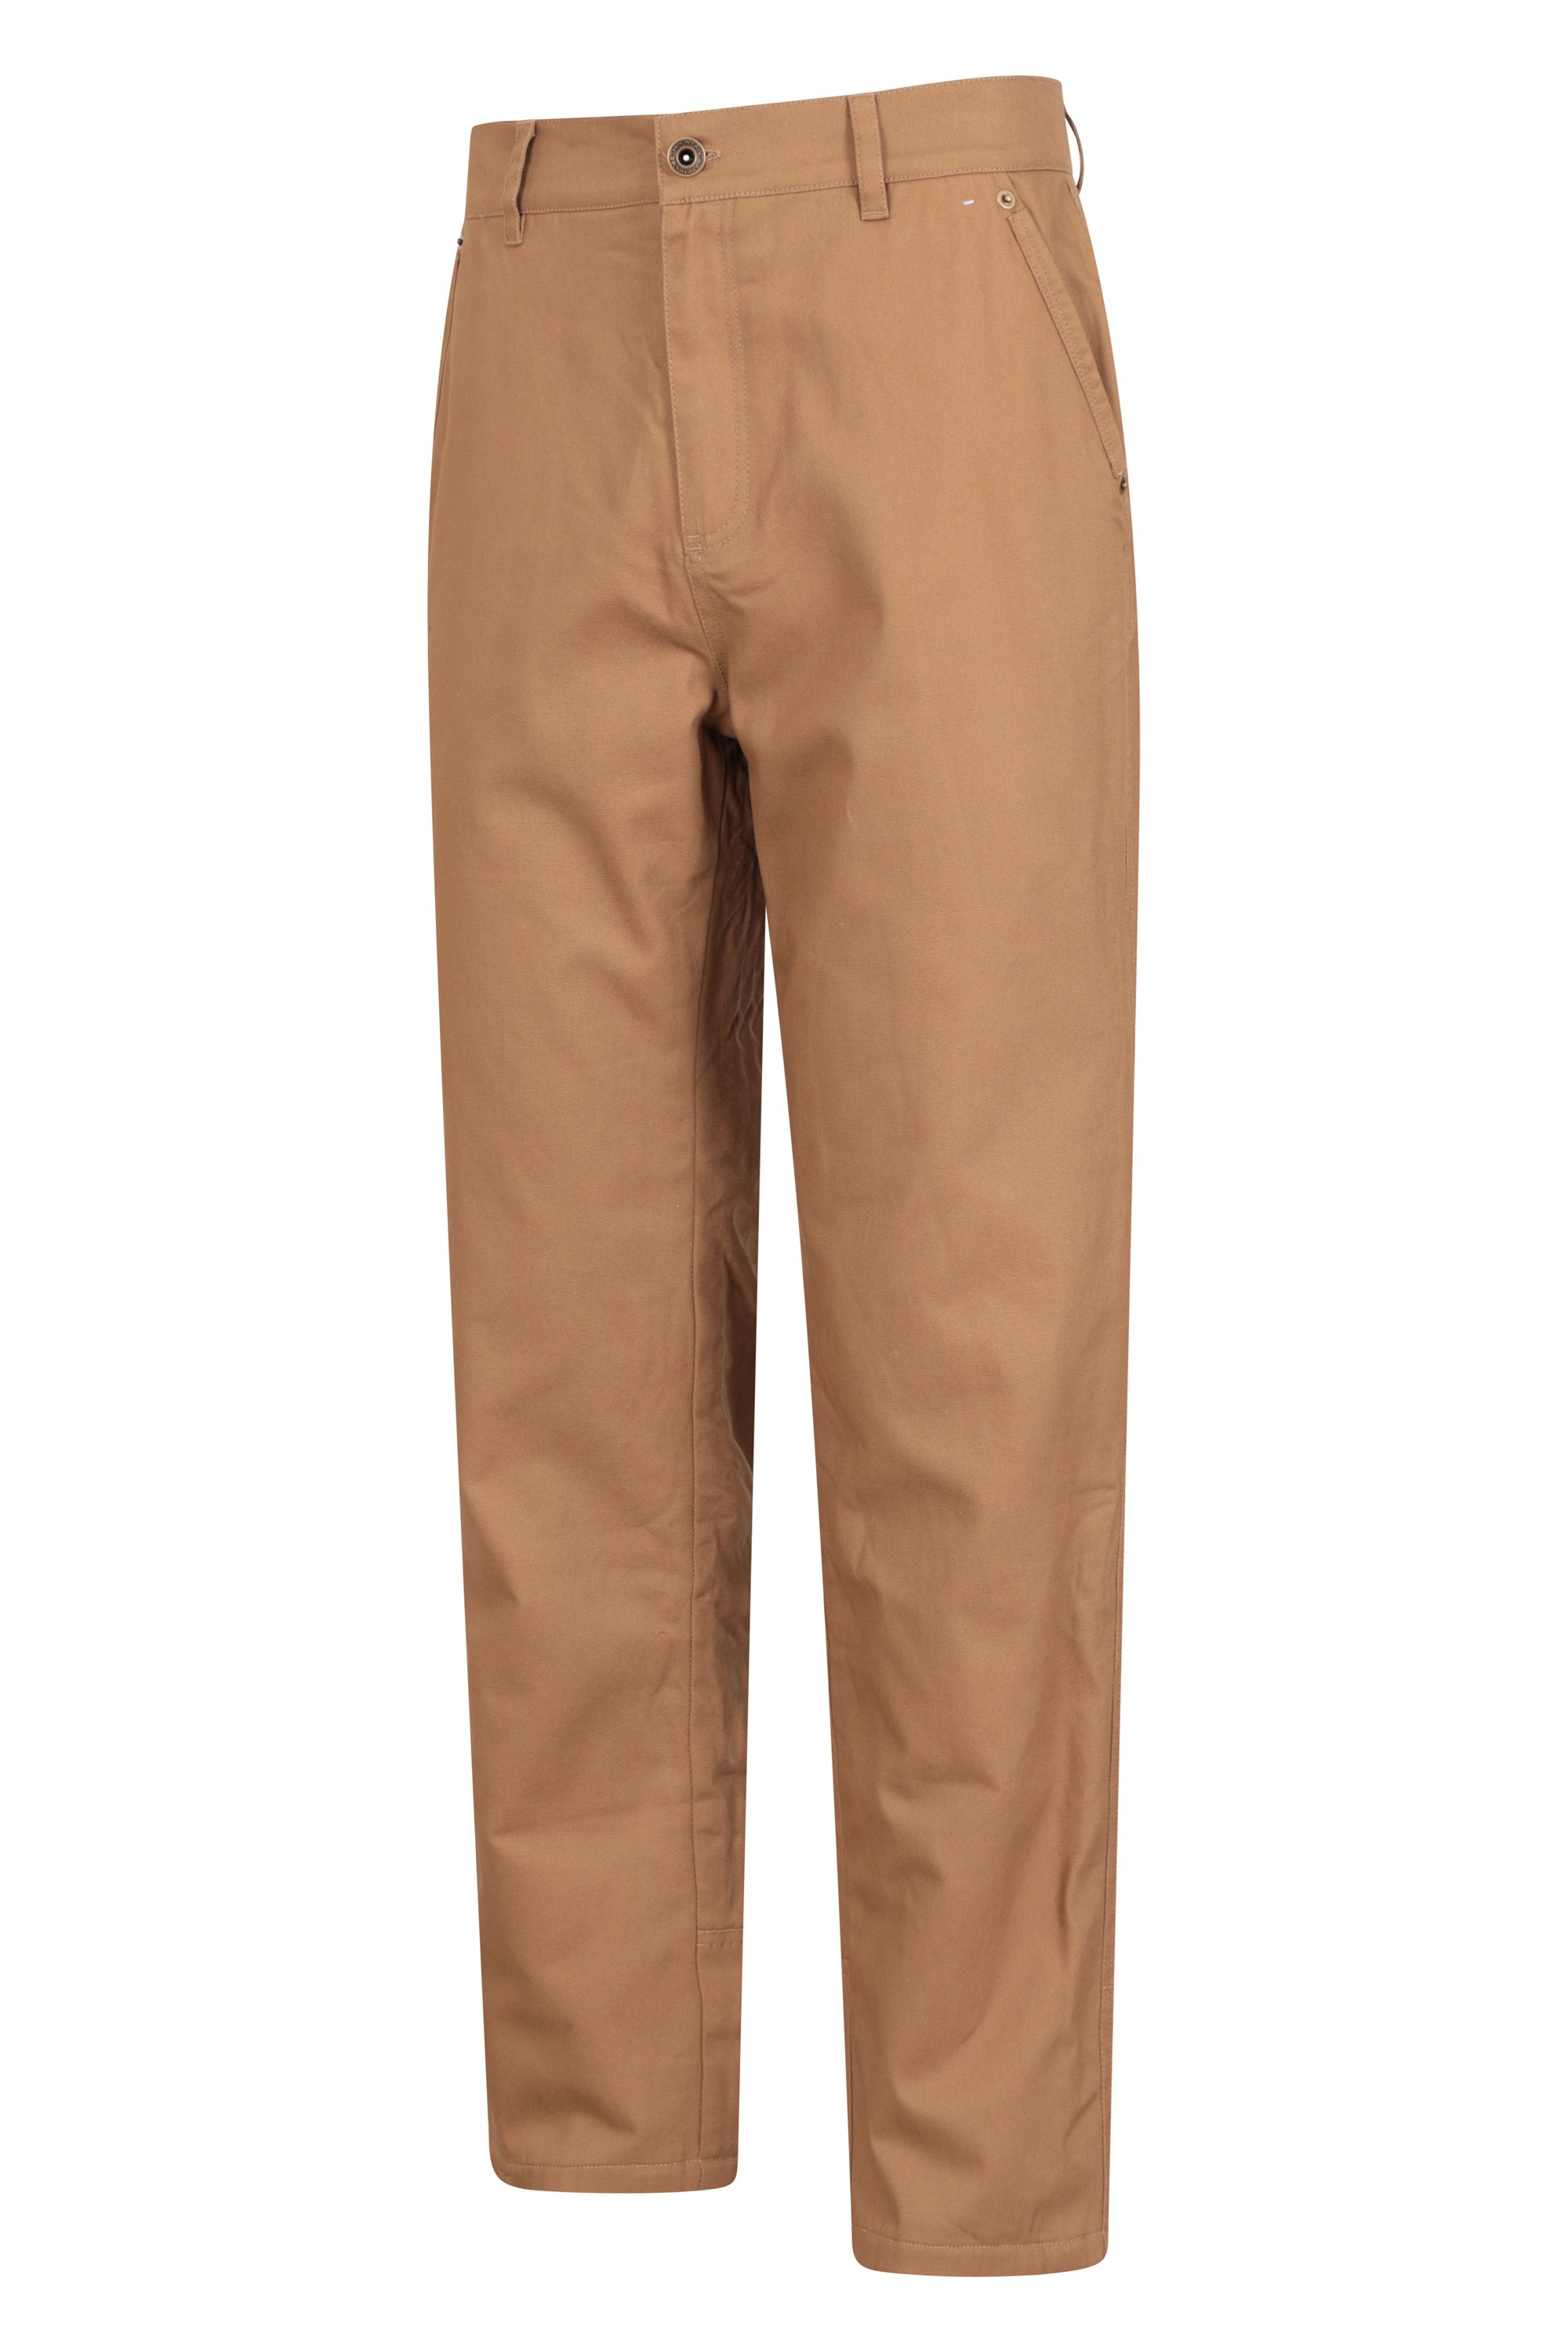 Mens Insulated Trousers  Lined Trousers  GO Outdoors